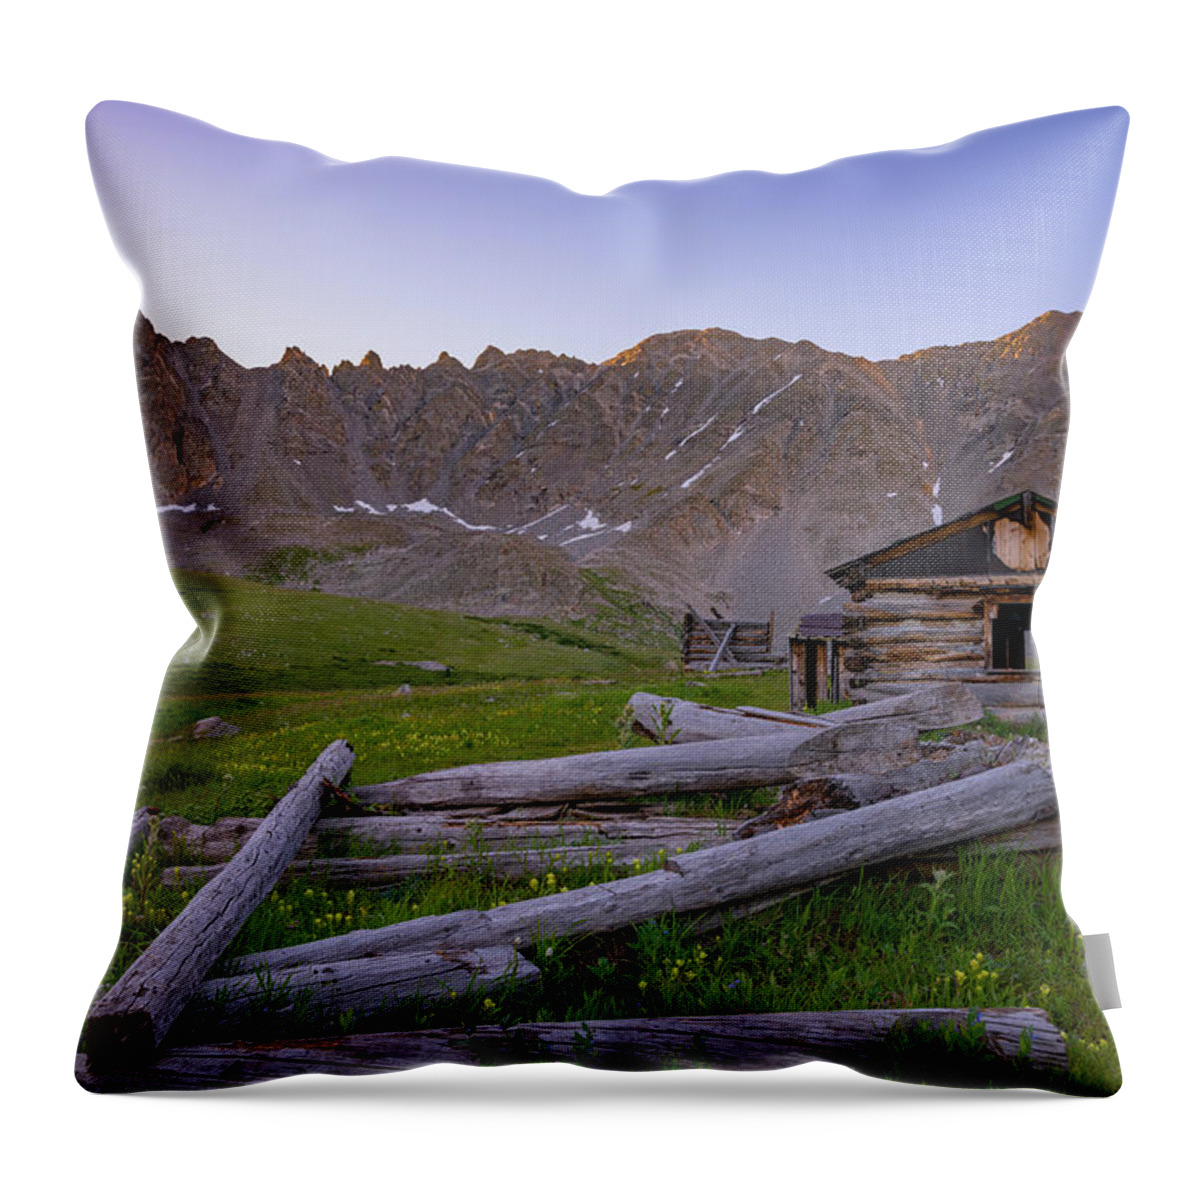 Colorado Throw Pillow featuring the photograph Mayflower Homestead by Darren White